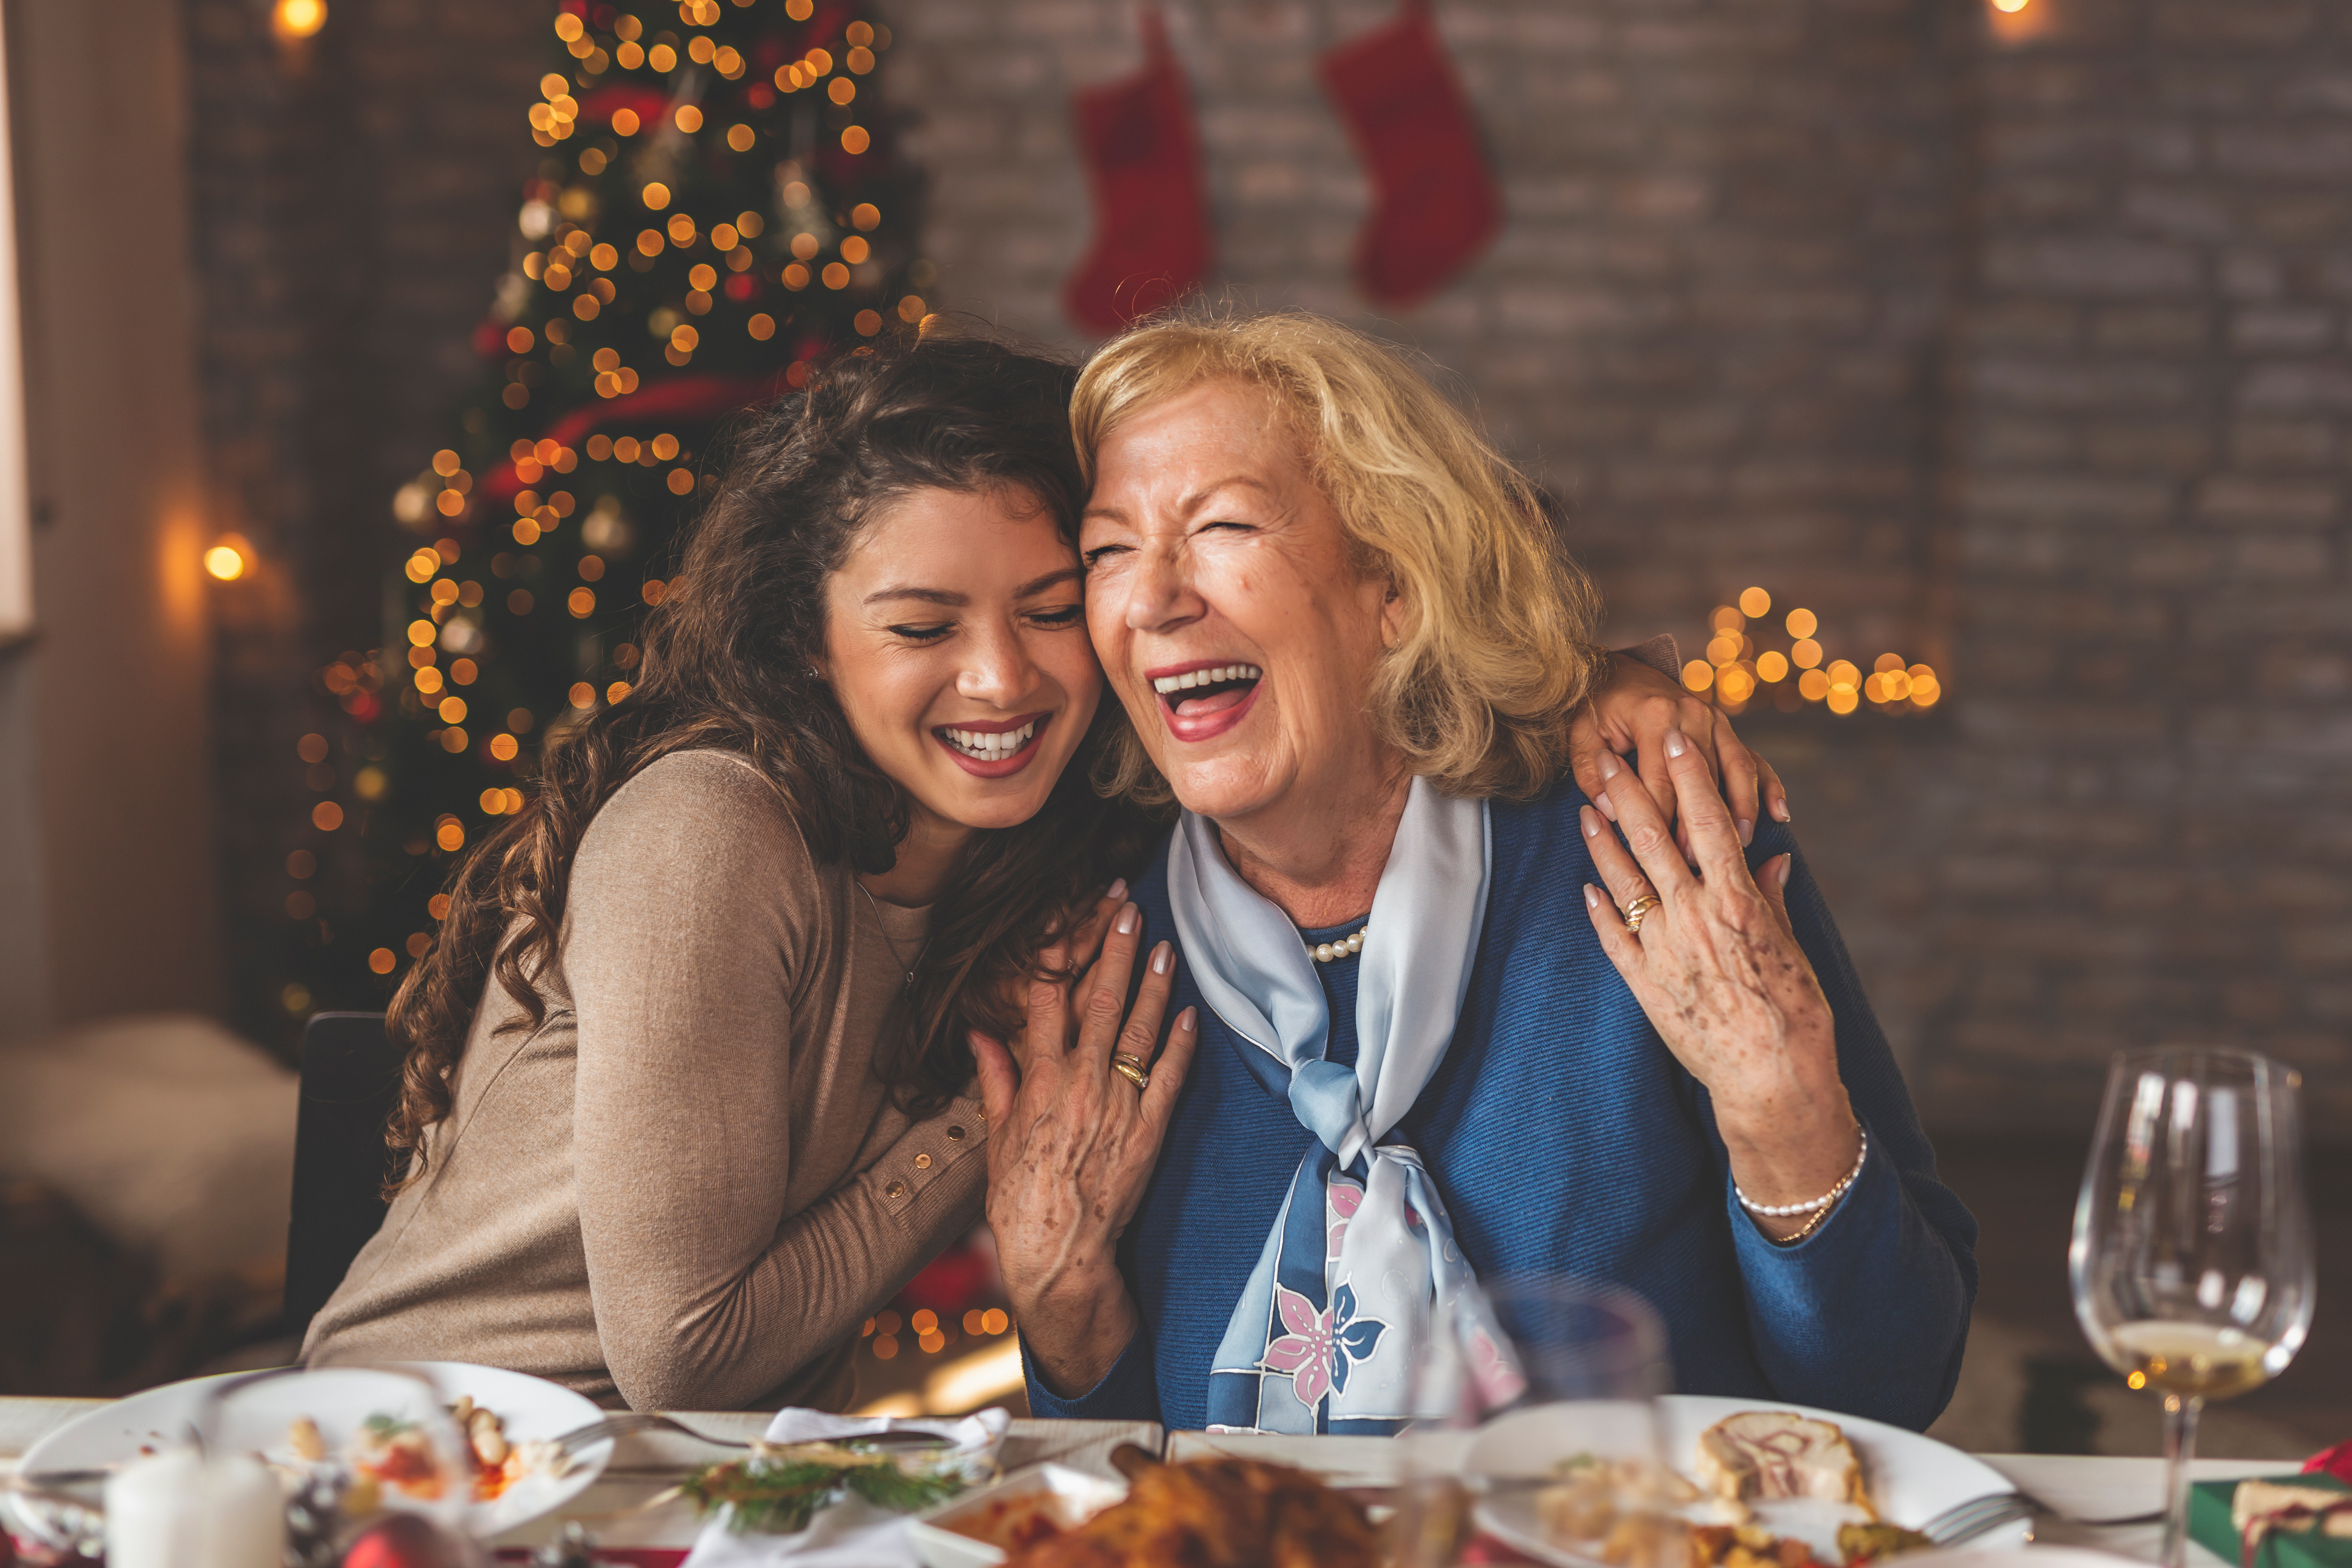 A young woman hugging her mom on Christmas | Source: Shutterstock